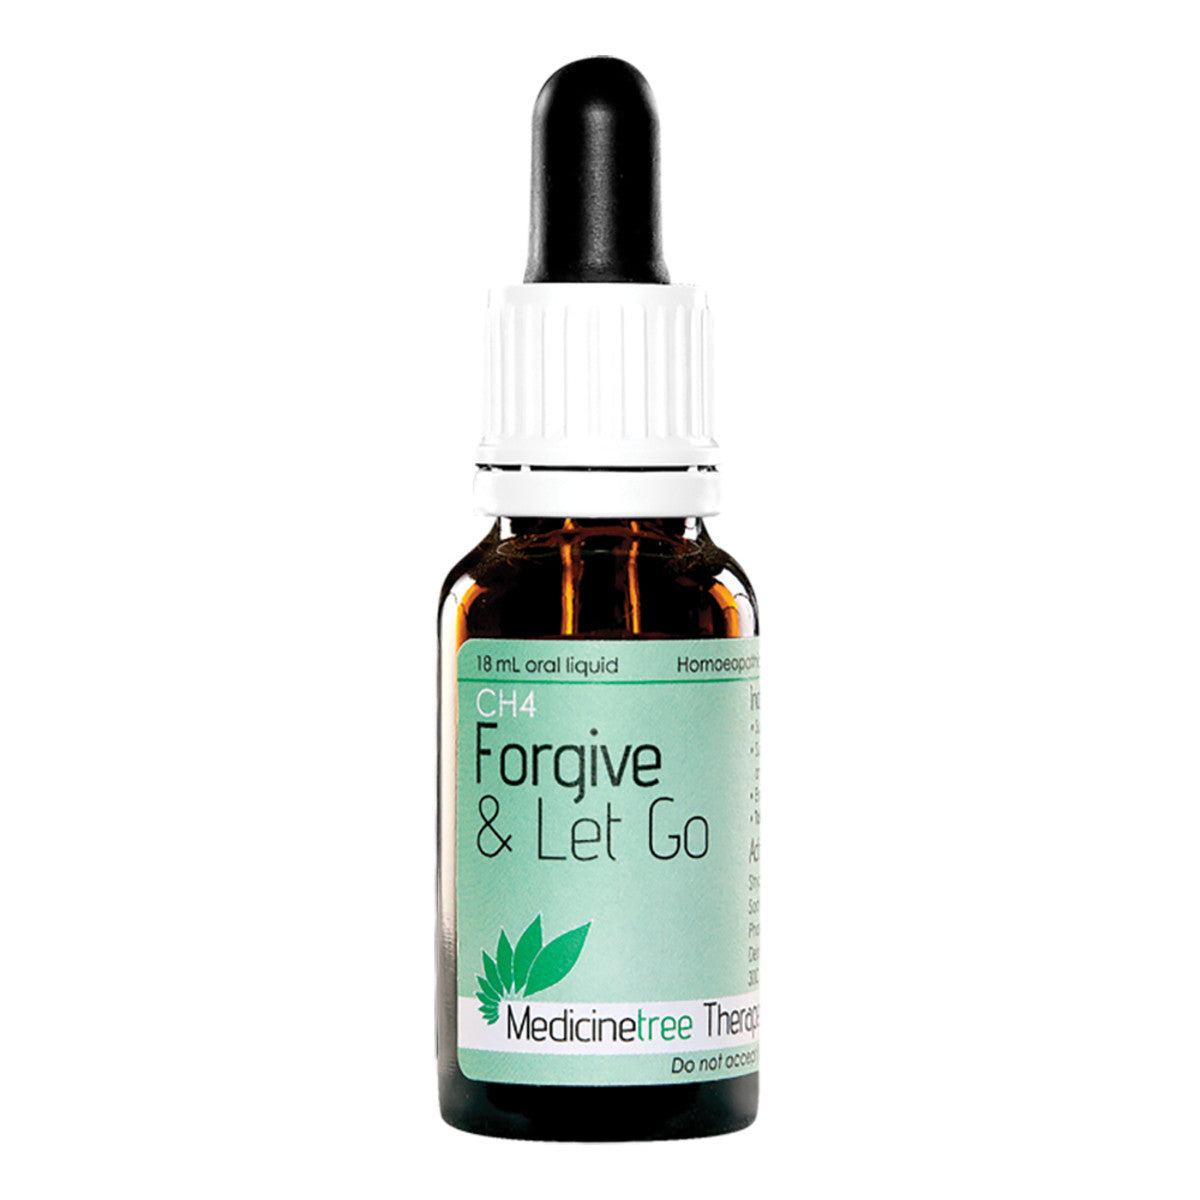 Medicine Tree - Emotion Forgive and Let Go (CH4) 18ml